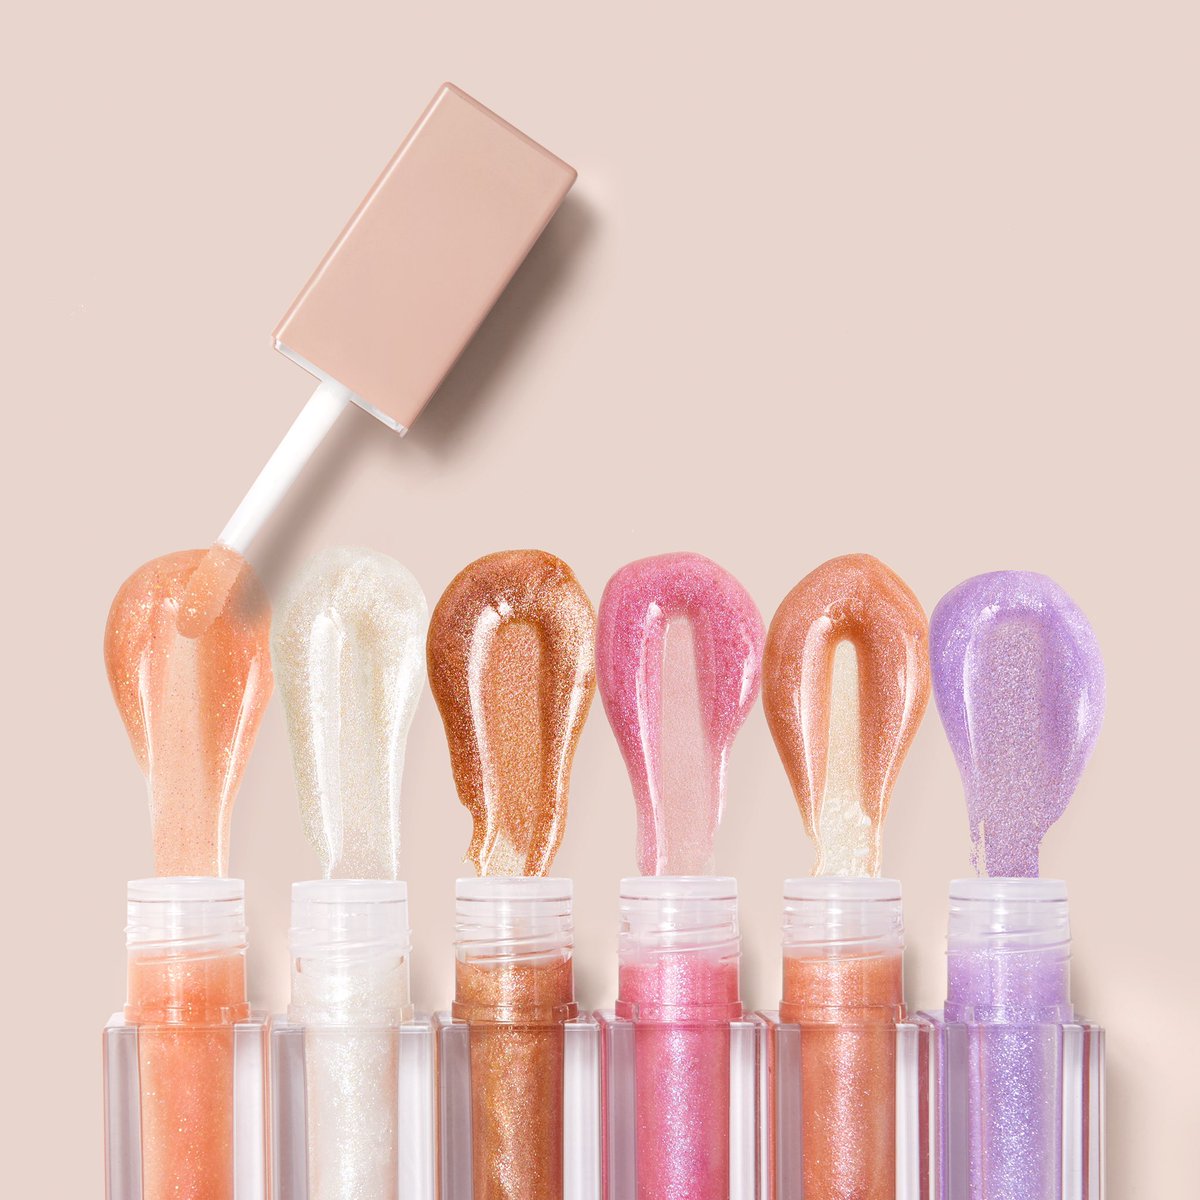 TODAY ONLY! Buy any 2 Glosses for $28 at https://t.co/PoBZ3bhjs8 Ends TONIGHT at 11:59PM PST #KKWBEAUTY https://t.co/l6EpRv2WVf